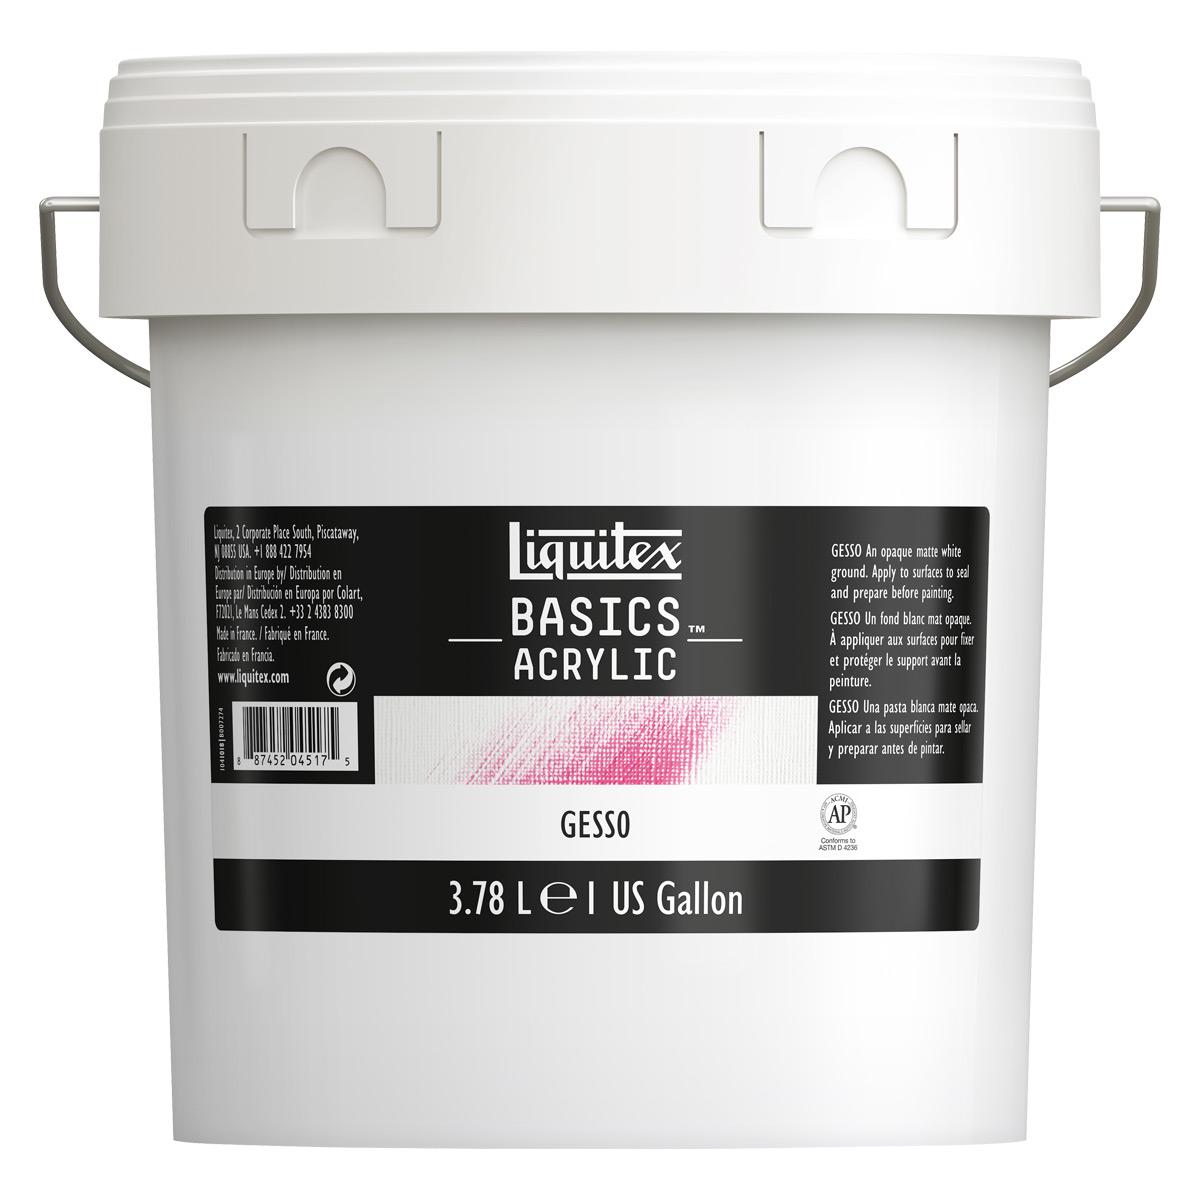  Jacquard Dorlands Wax - 1 Gallon - Versatile Pure Wax and Damar  Resin - Protective Topcoat for Sealing and Finishing : Automotive